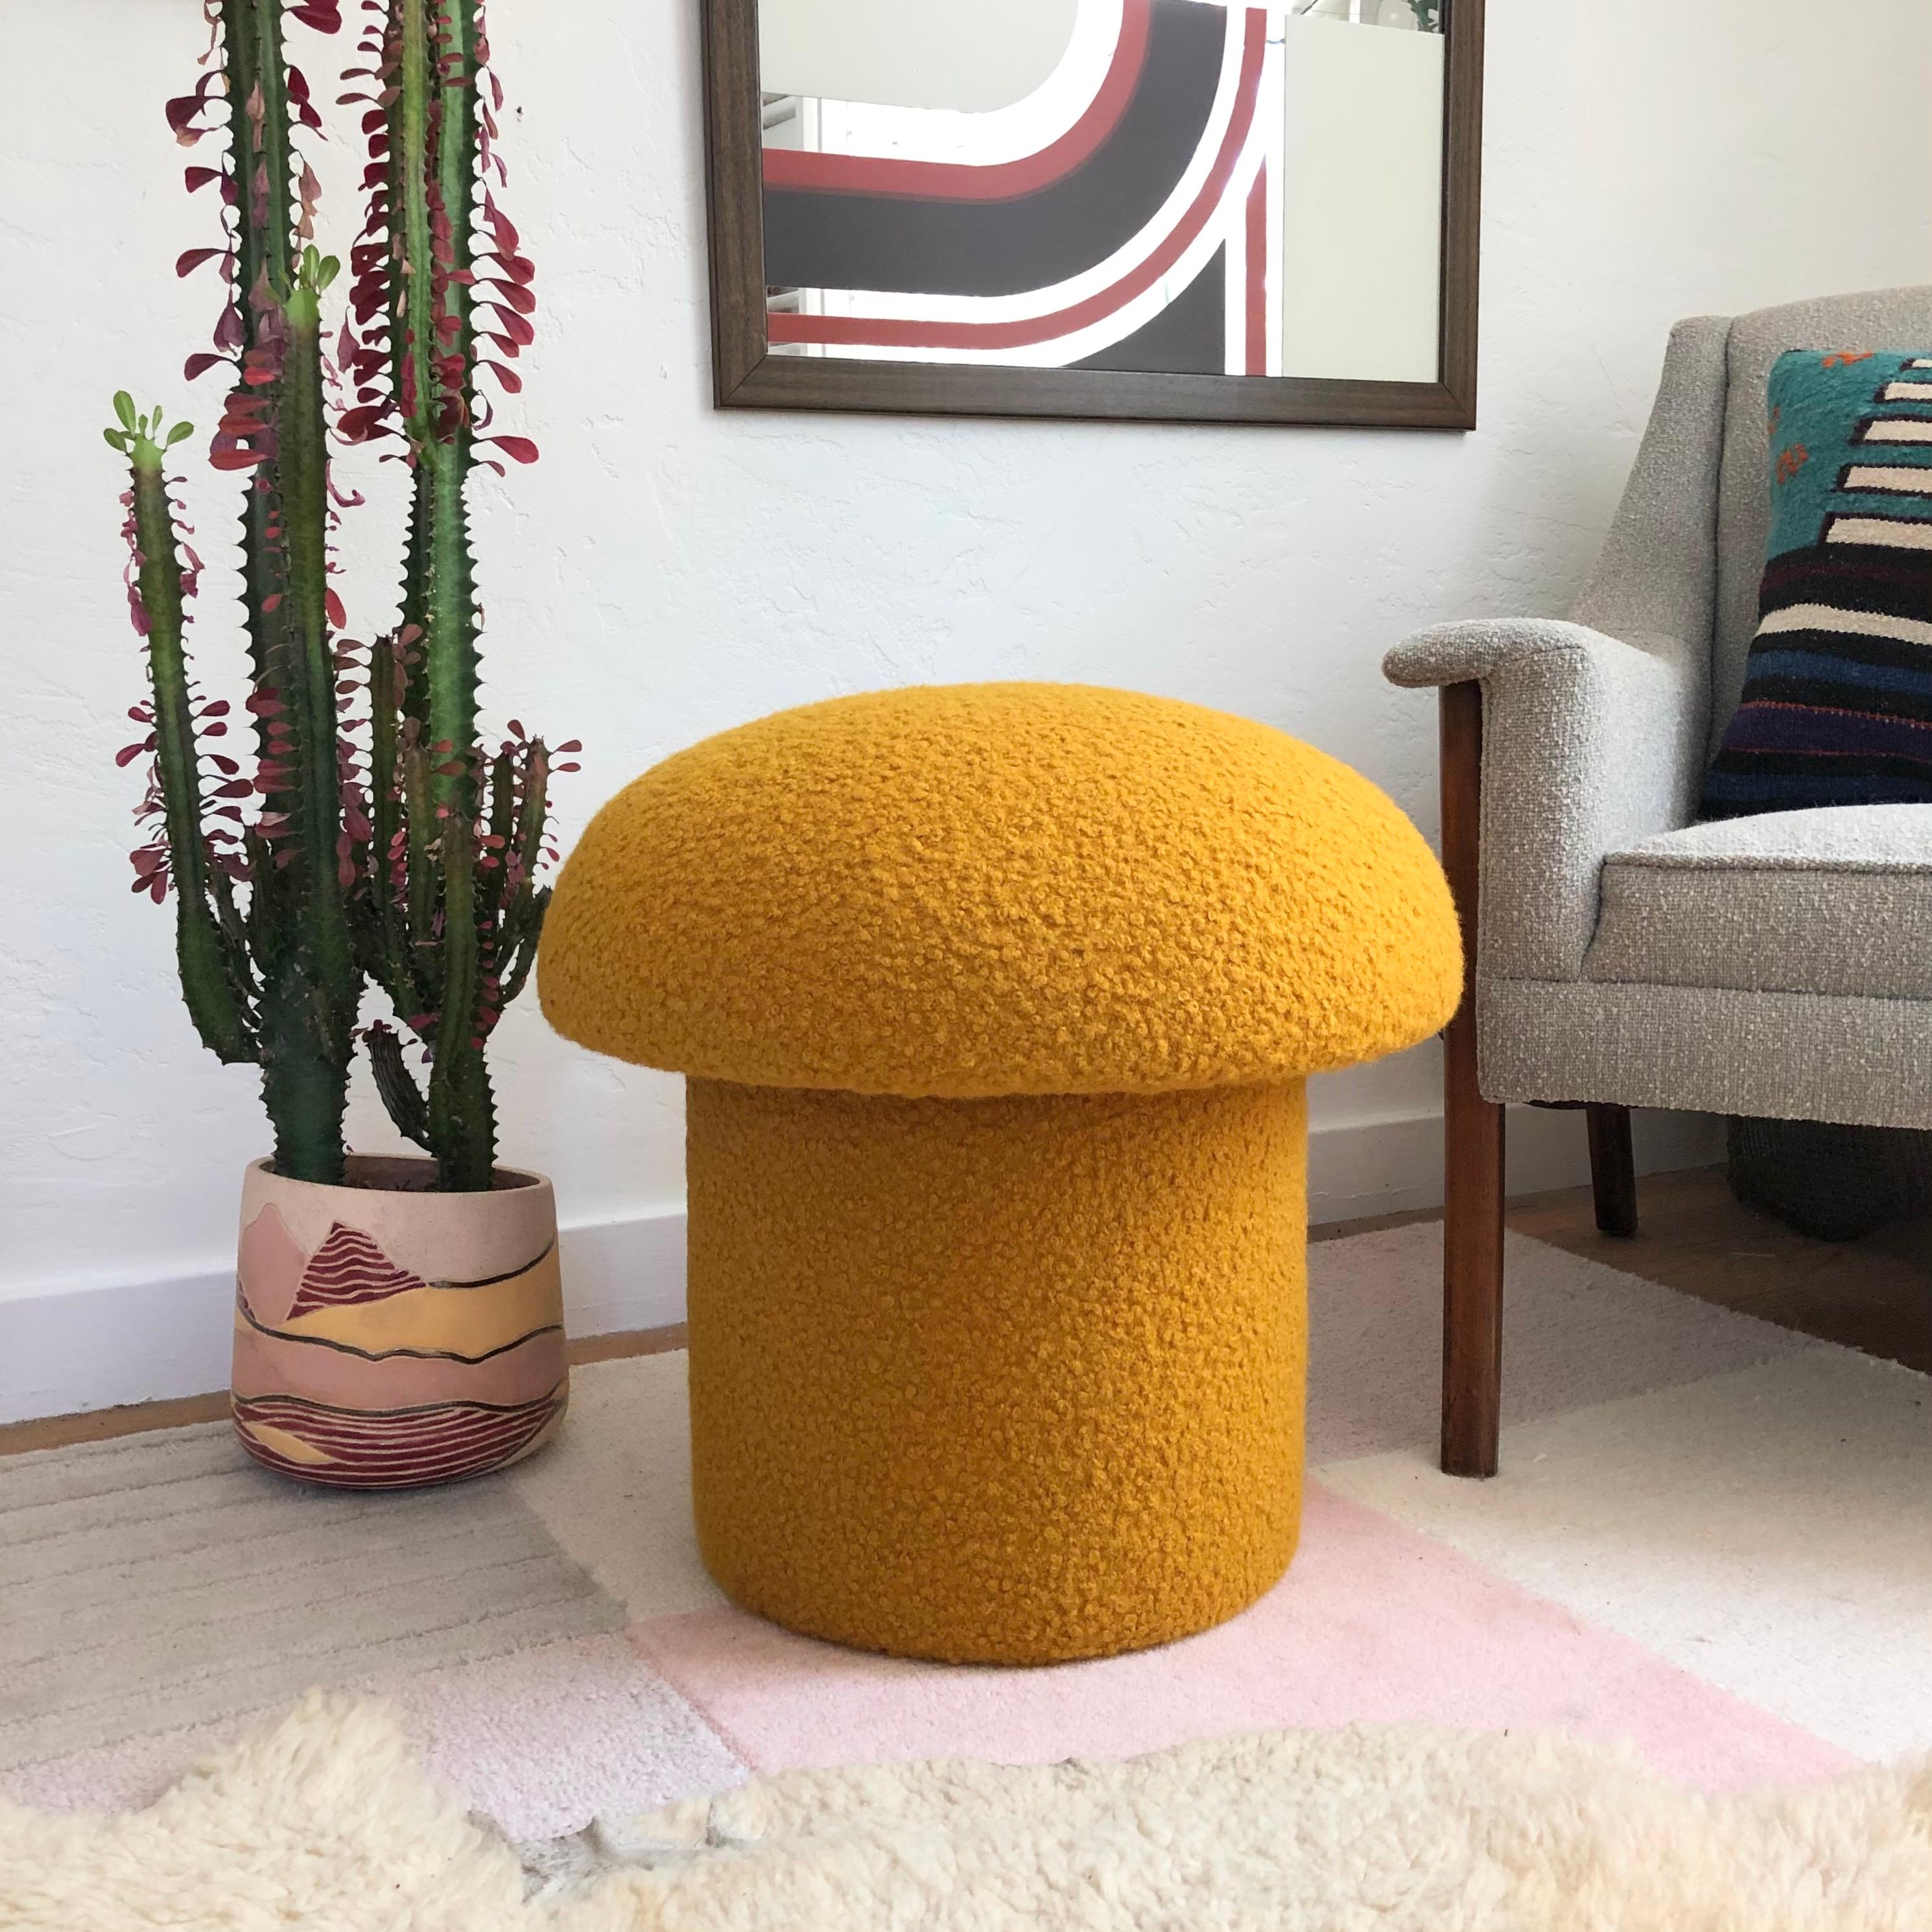 A handmade mushroom shaped ottoman, upholstered in a mustard colored curly boucle fabric. Perfect for using as a footstool or extra occasional seating. A great sculptural accent piece.